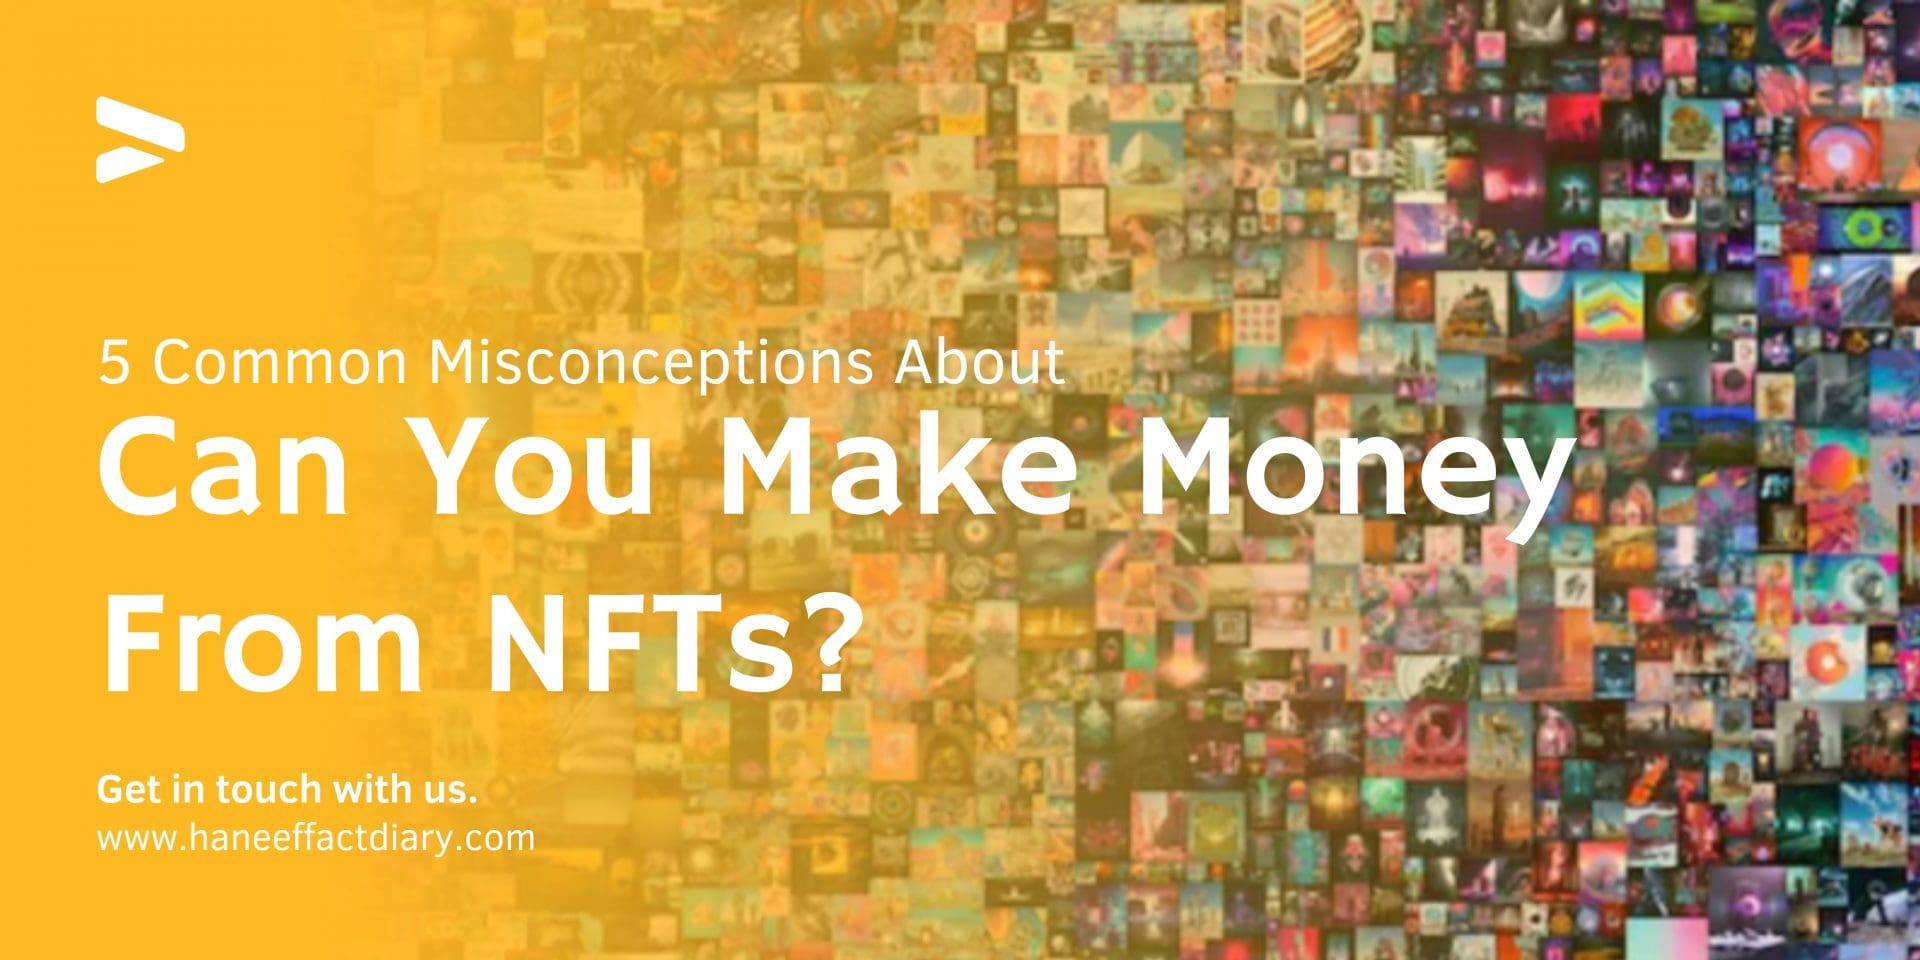 5 Common Misconceptions About Can You Make Money From NFTs